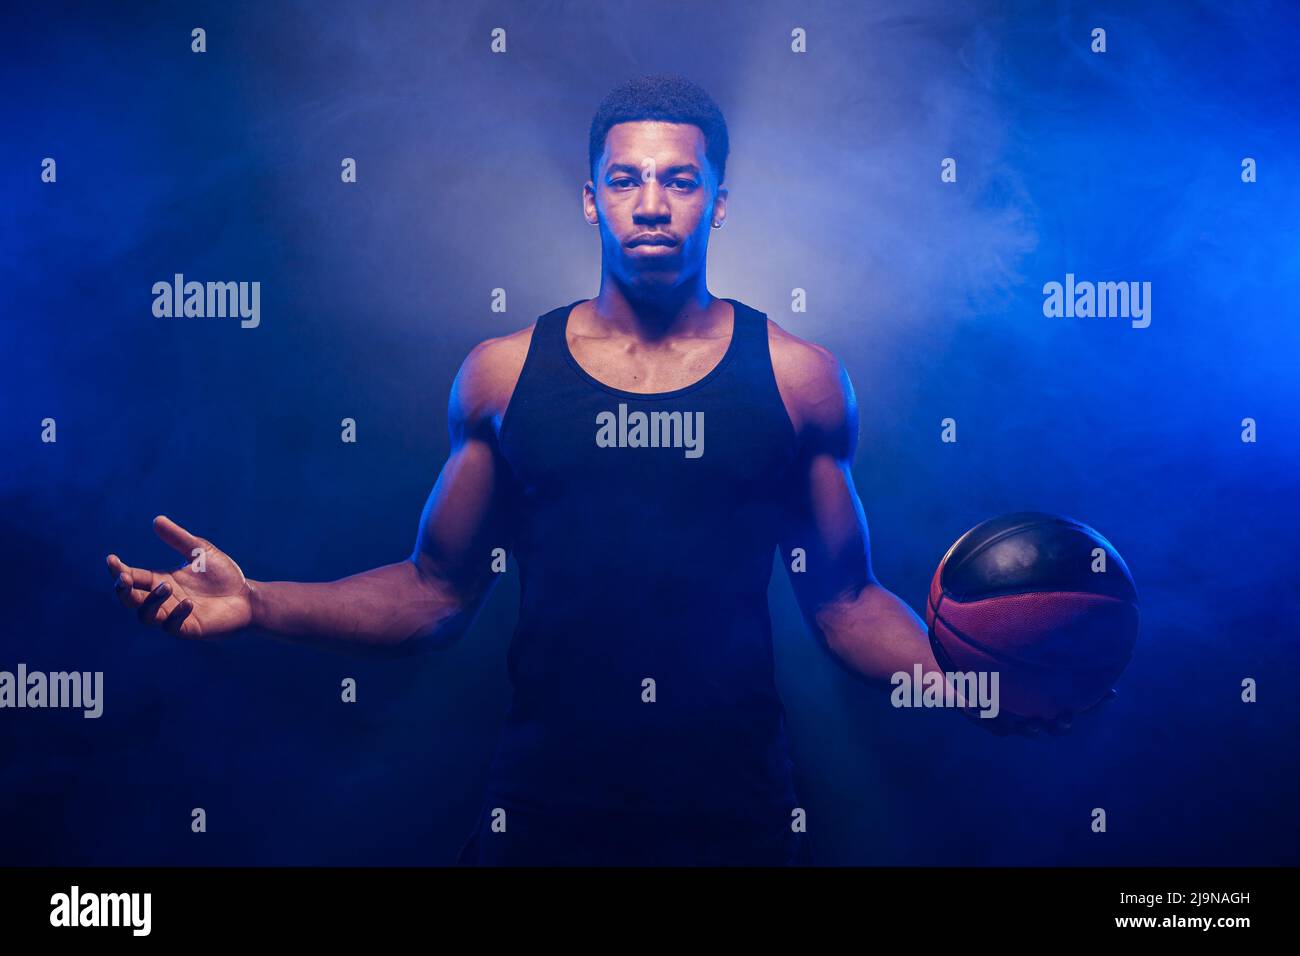 Basketball player lit with blue color posing with a ball against smoke background. Serious concentrated african american man. Stock Photo